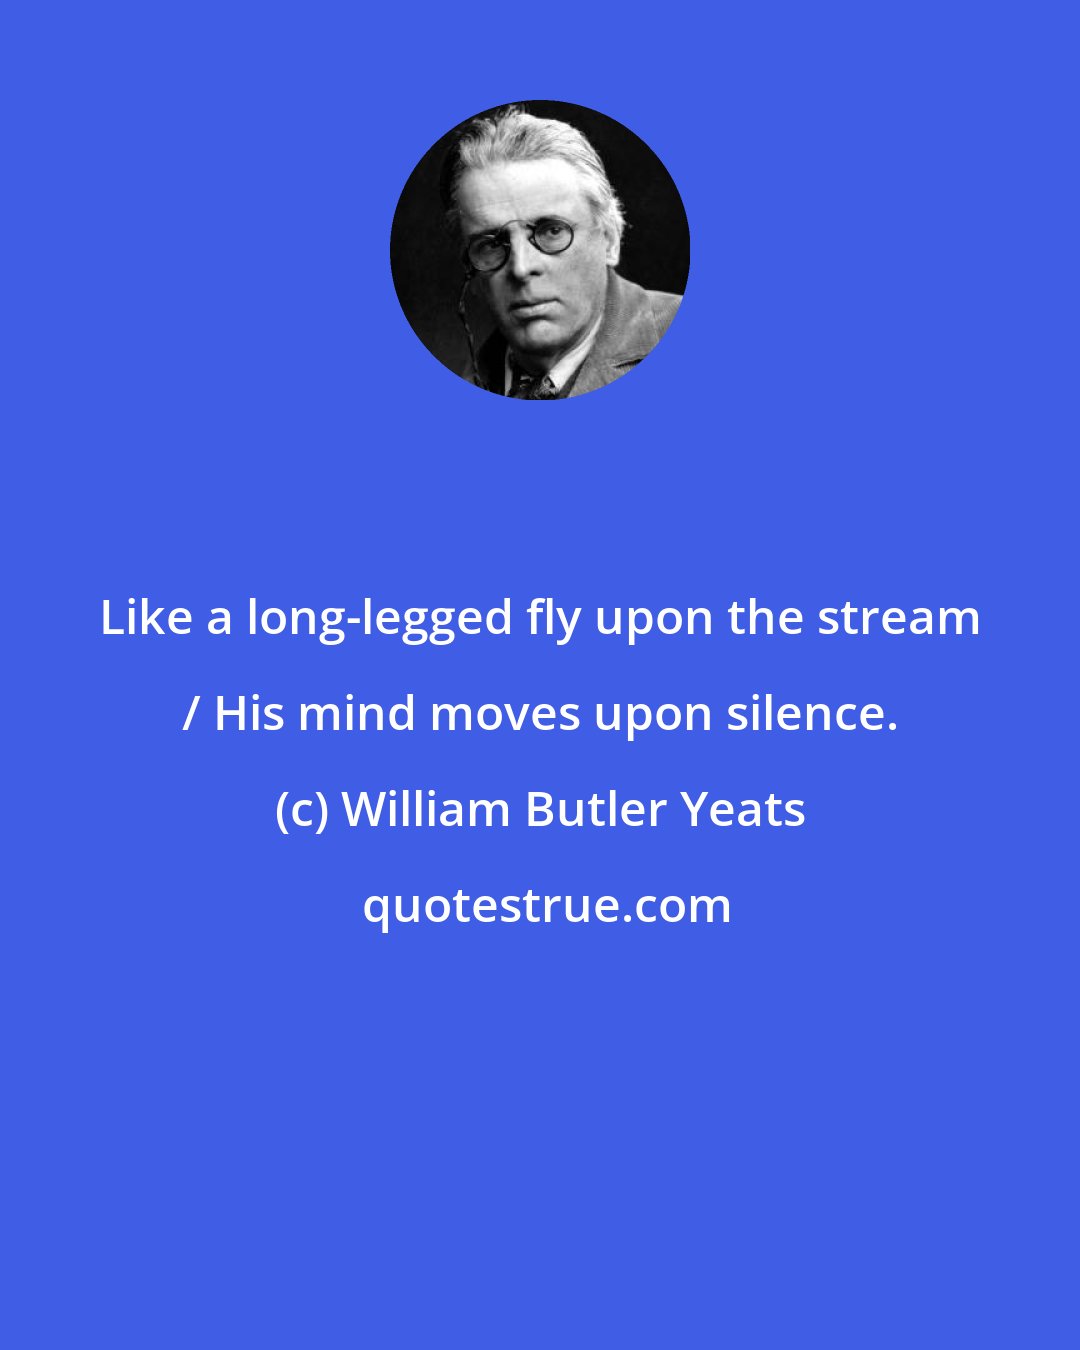 William Butler Yeats: Like a long-legged fly upon the stream / His mind moves upon silence.